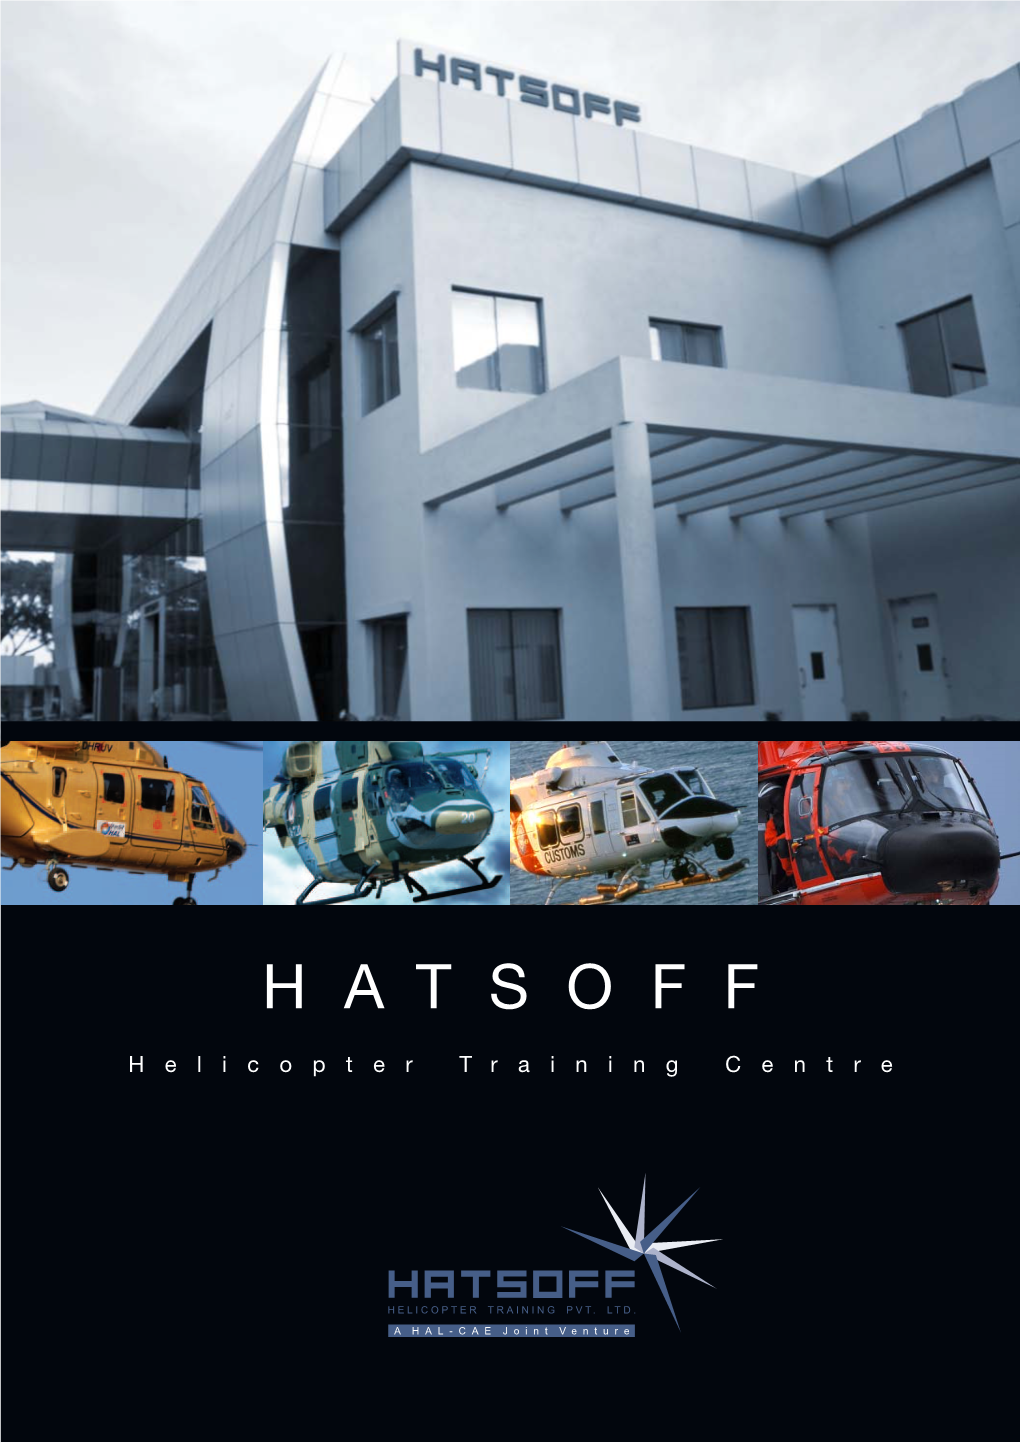 HATSOFF Helicopter Training Centre Is Designed to Provide Your Helicopter Crews with a Superior Learning Experience and the Highest-Quality Helicopter Training